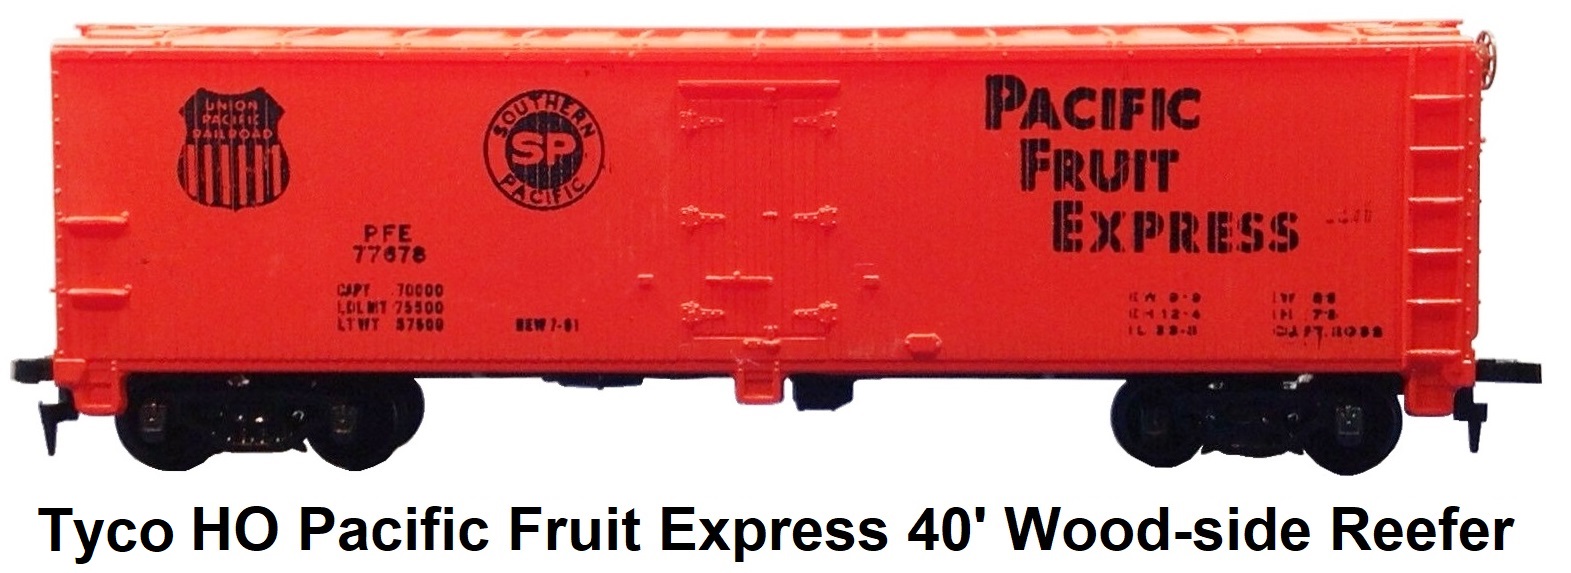 Tyco HO Pacific Fruit Express PFE 77678 40' wood-side reefer #329-J